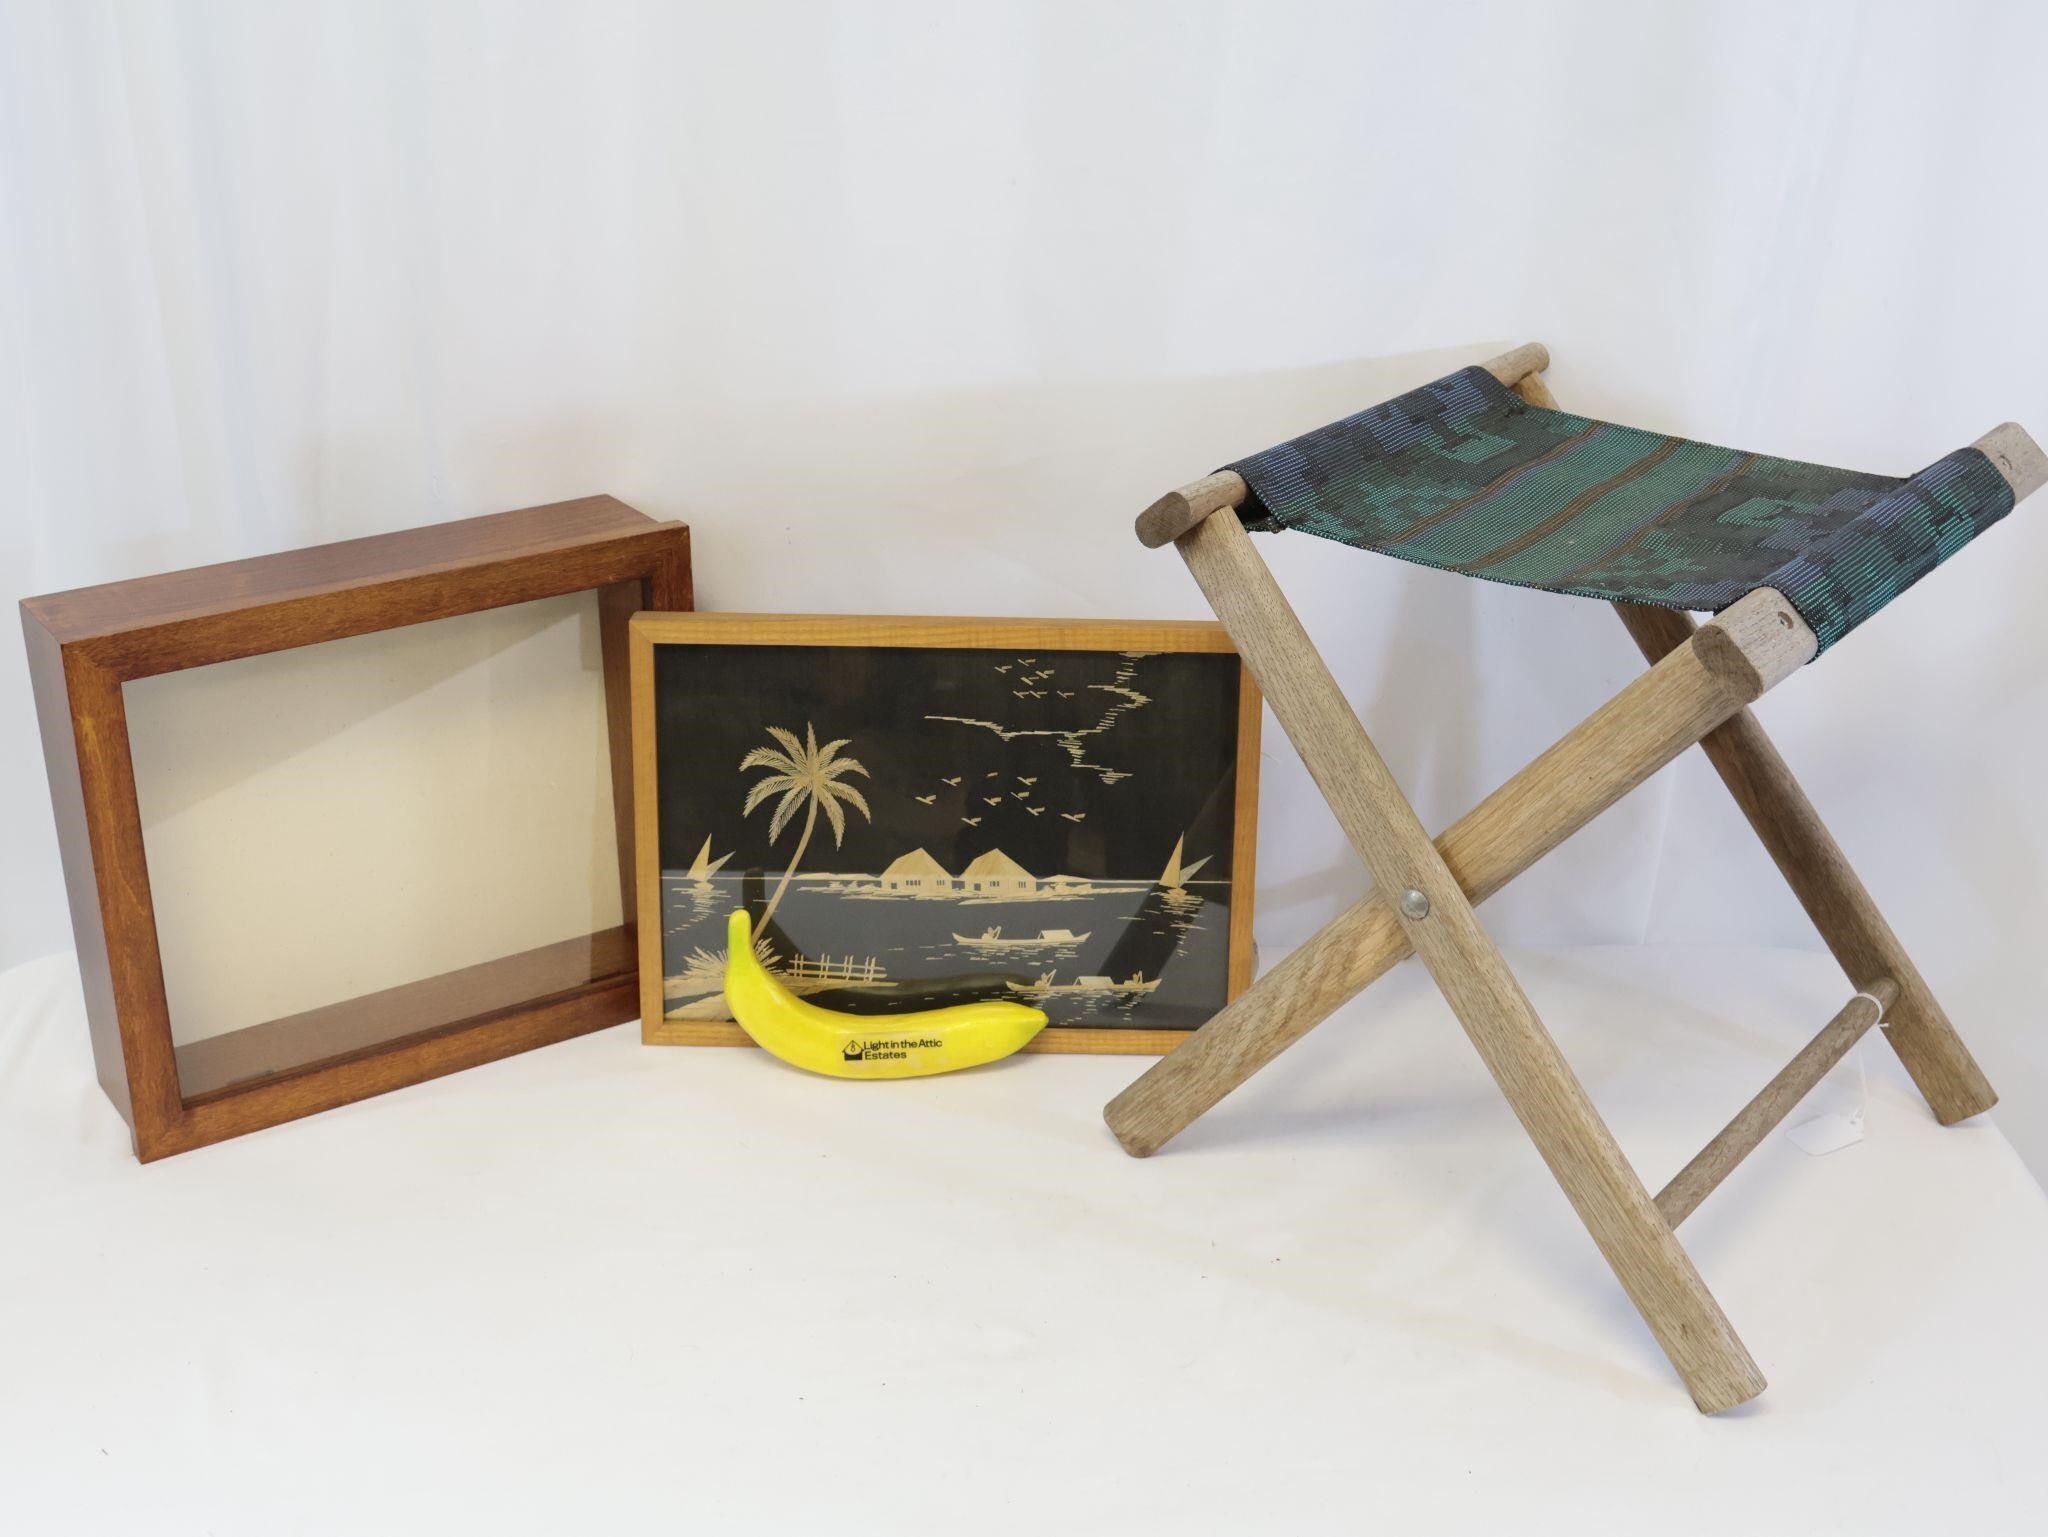 Camping Chair, Rice Straw Art, Wooden Display Case